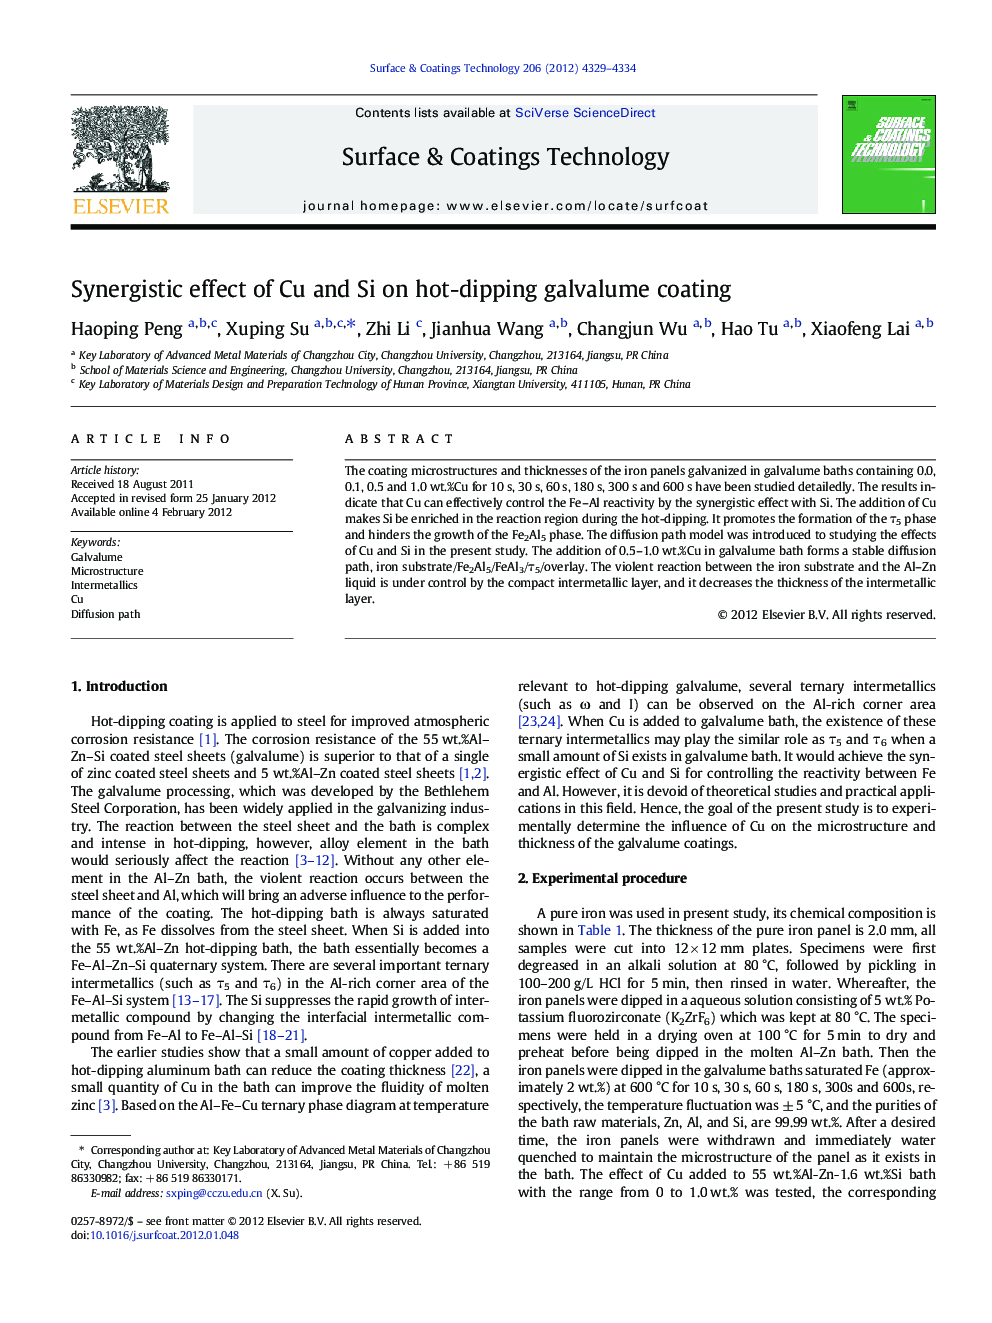 Synergistic effect of Cu and Si on hot-dipping galvalume coating